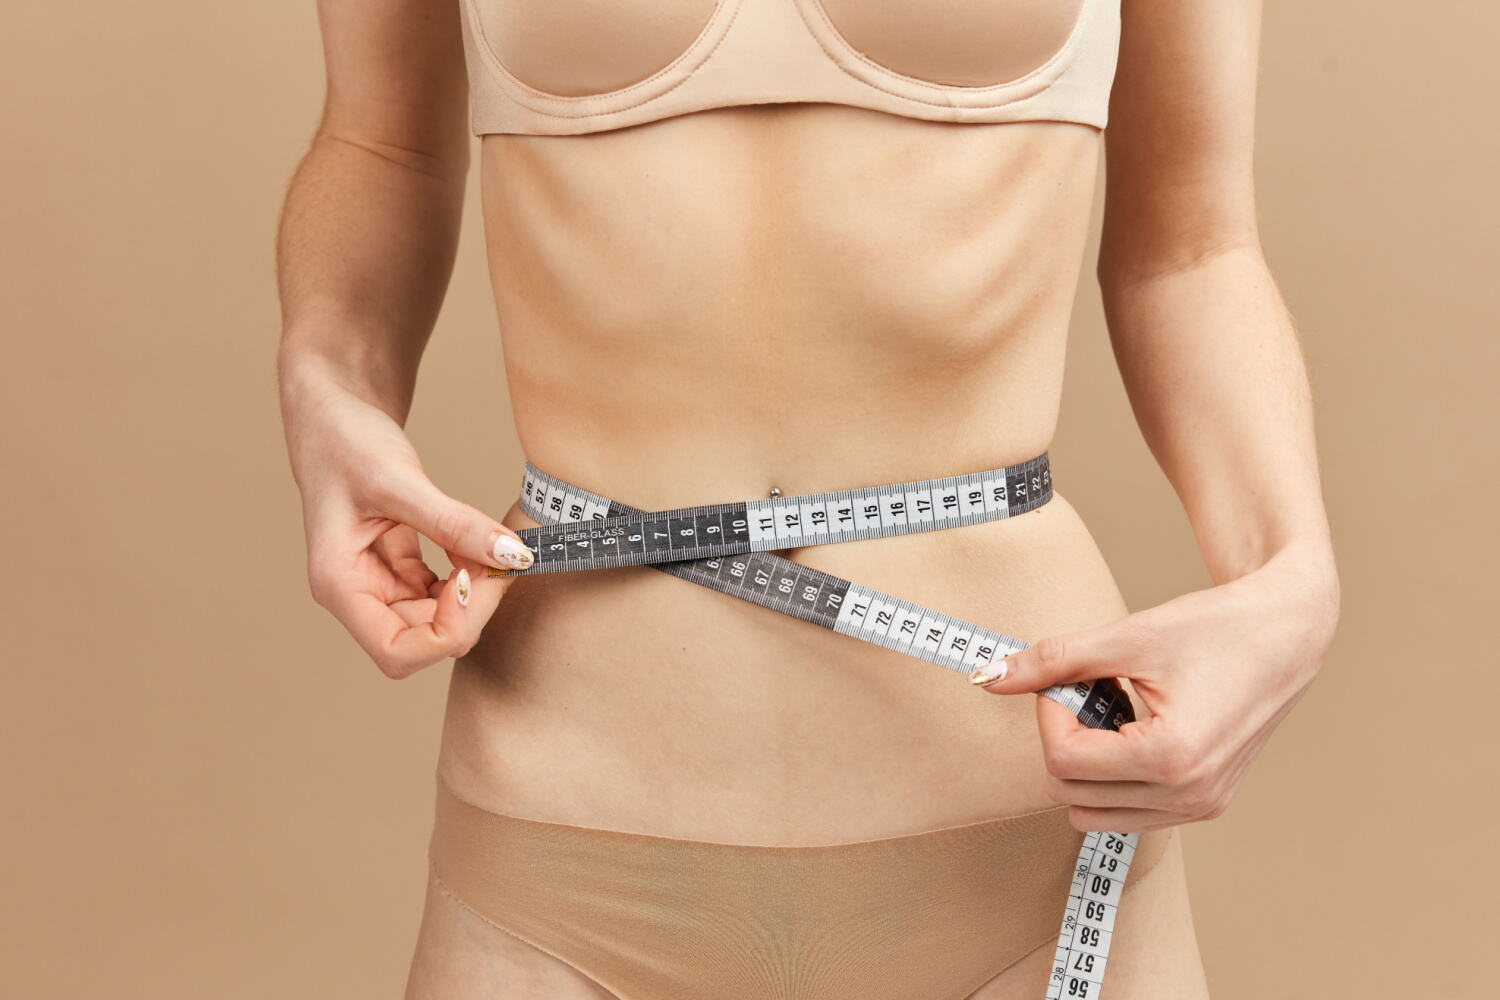 Understanding underweight and its causes